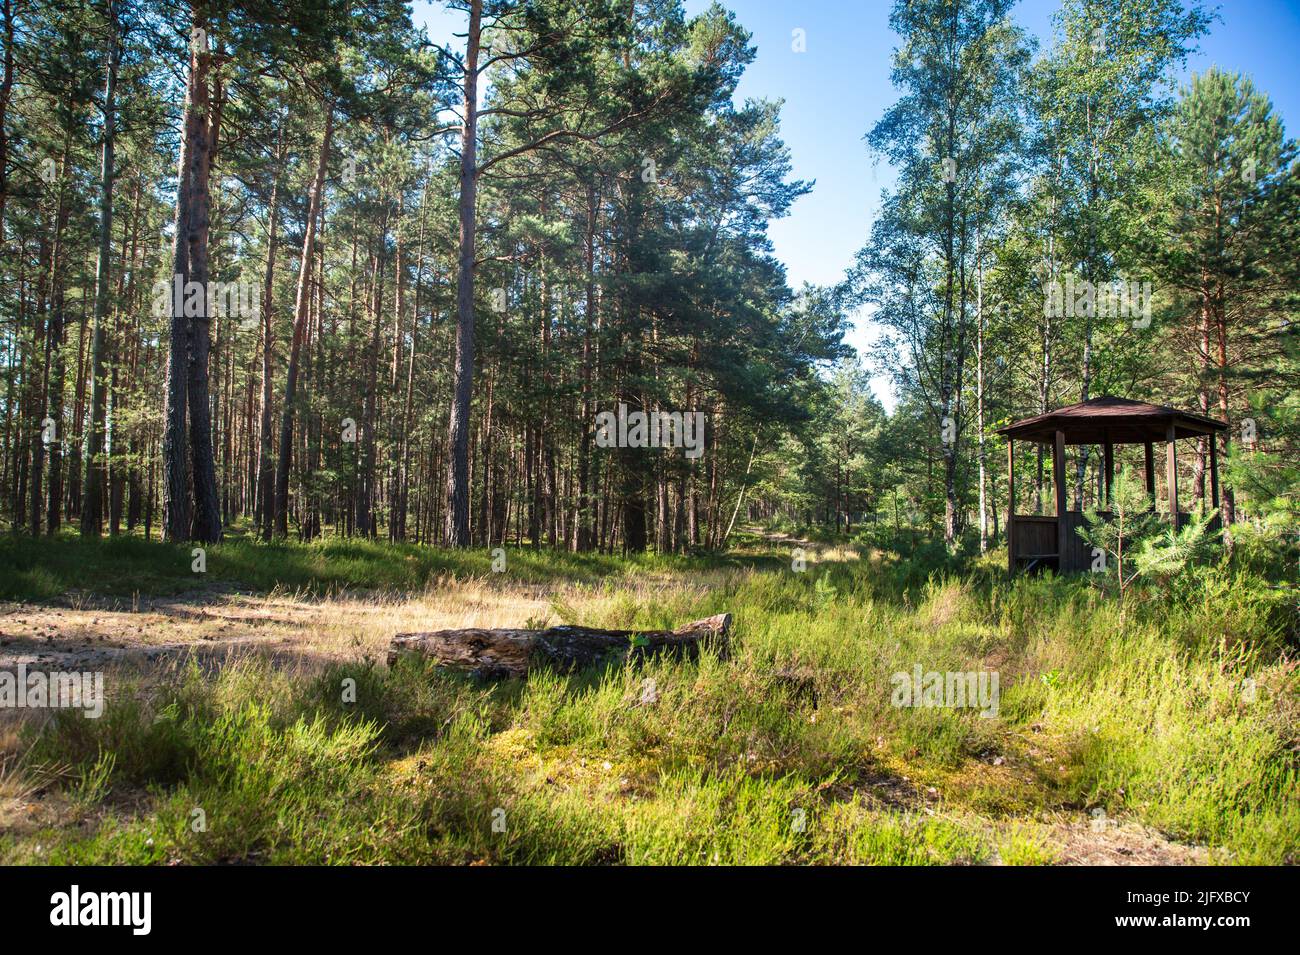 Hut in a pine forest, Lusatia, Germany Stock Photo